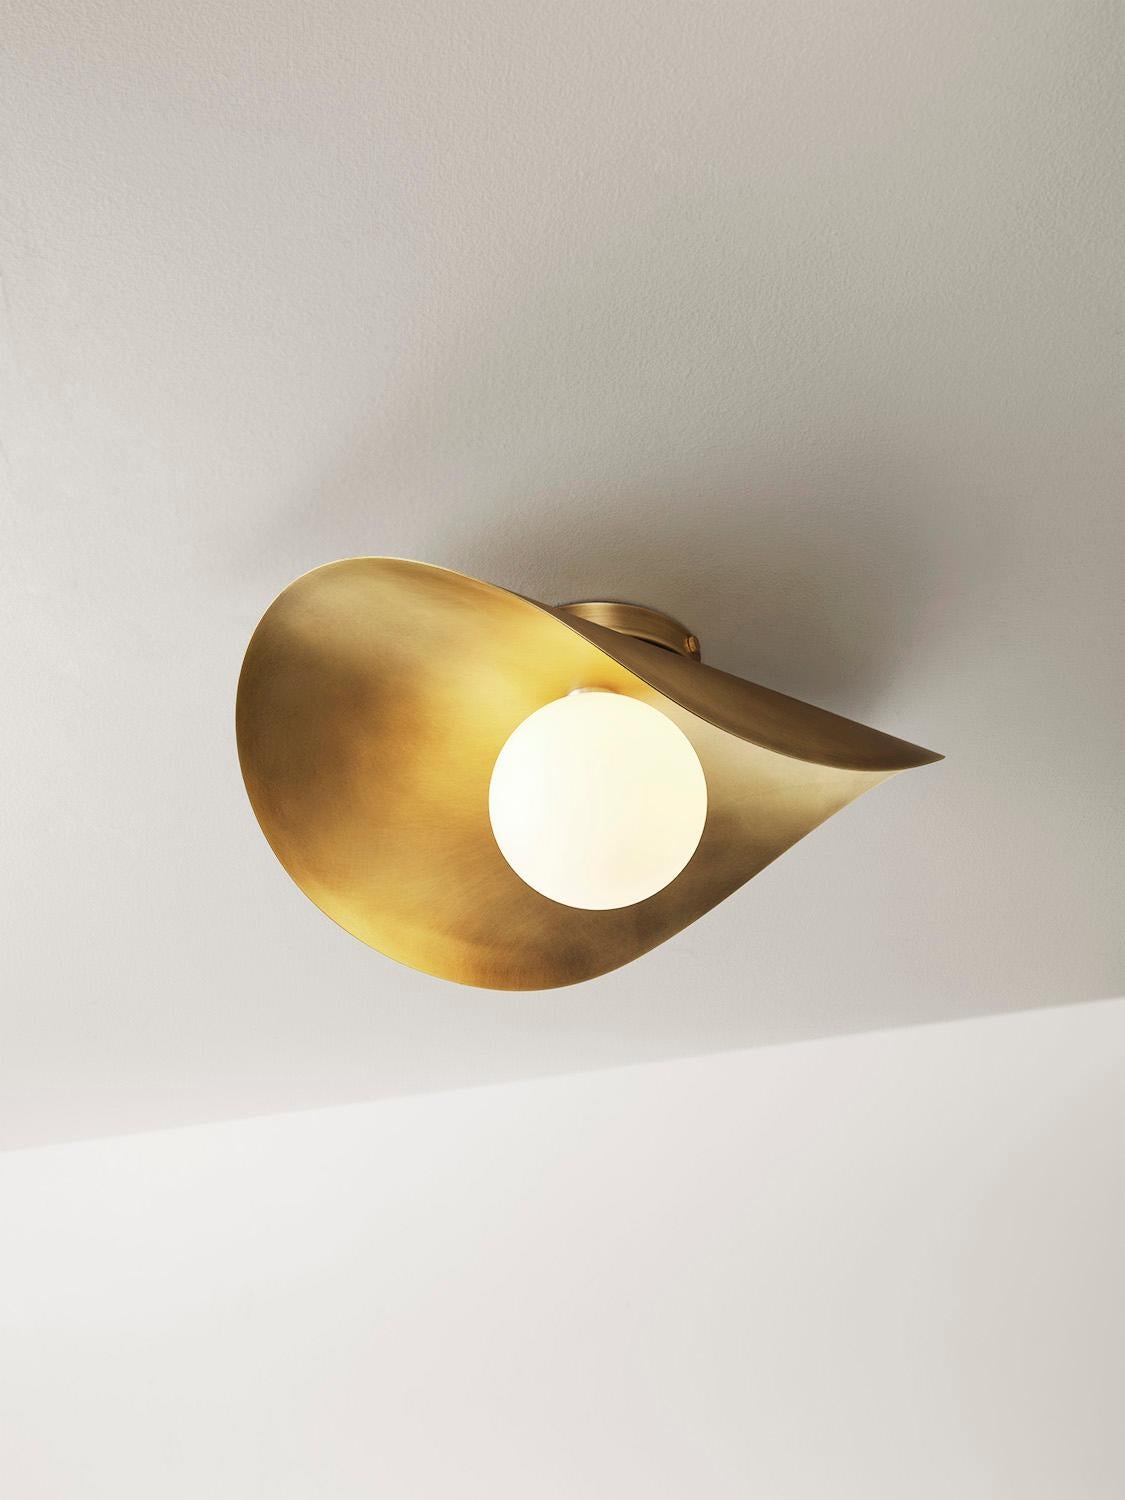 MONTERA Wall Sconce or Flushmount , biomorphic Brass & Glass, Blueprint Lighting For Sale 2